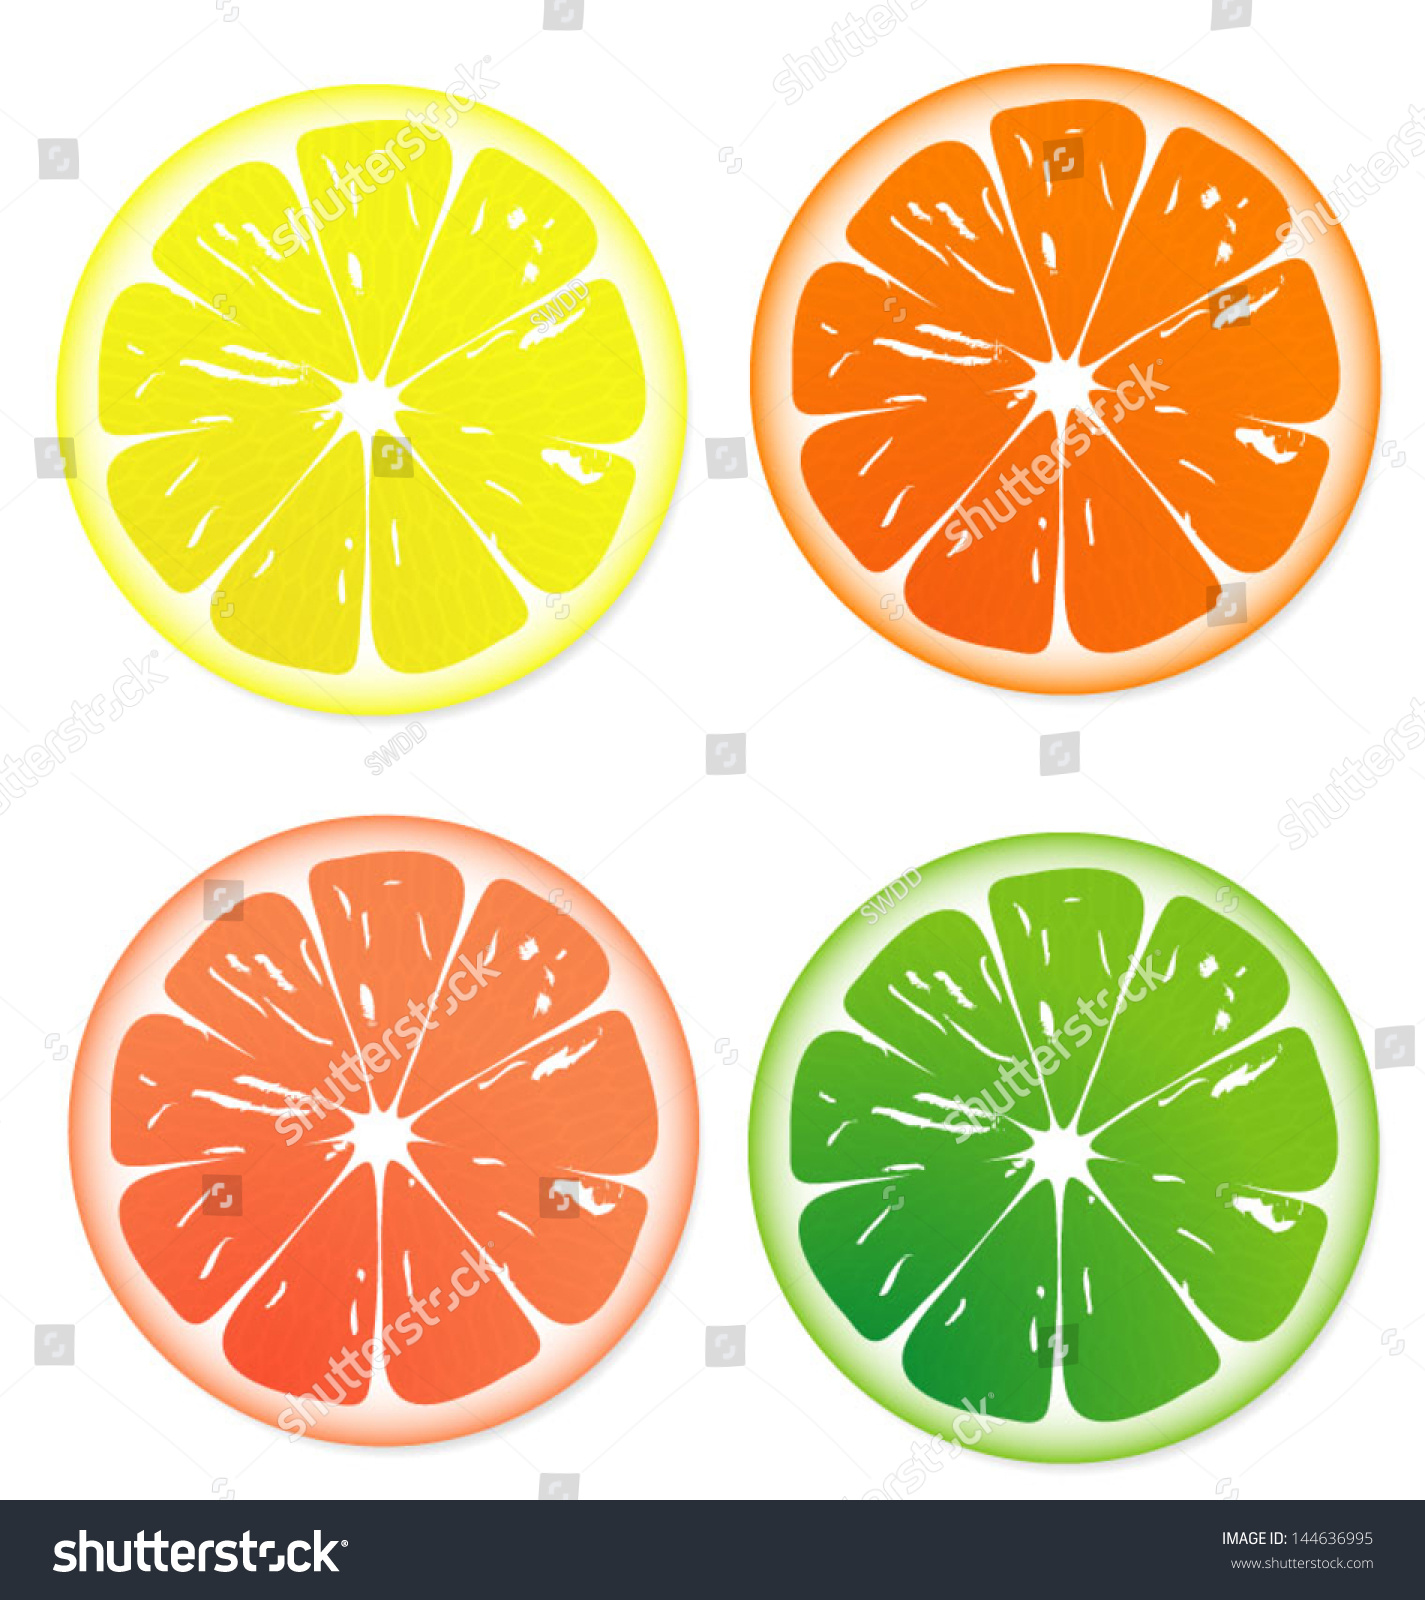 Download Fruit Slice Vector Isolated On White Stock Vector ...